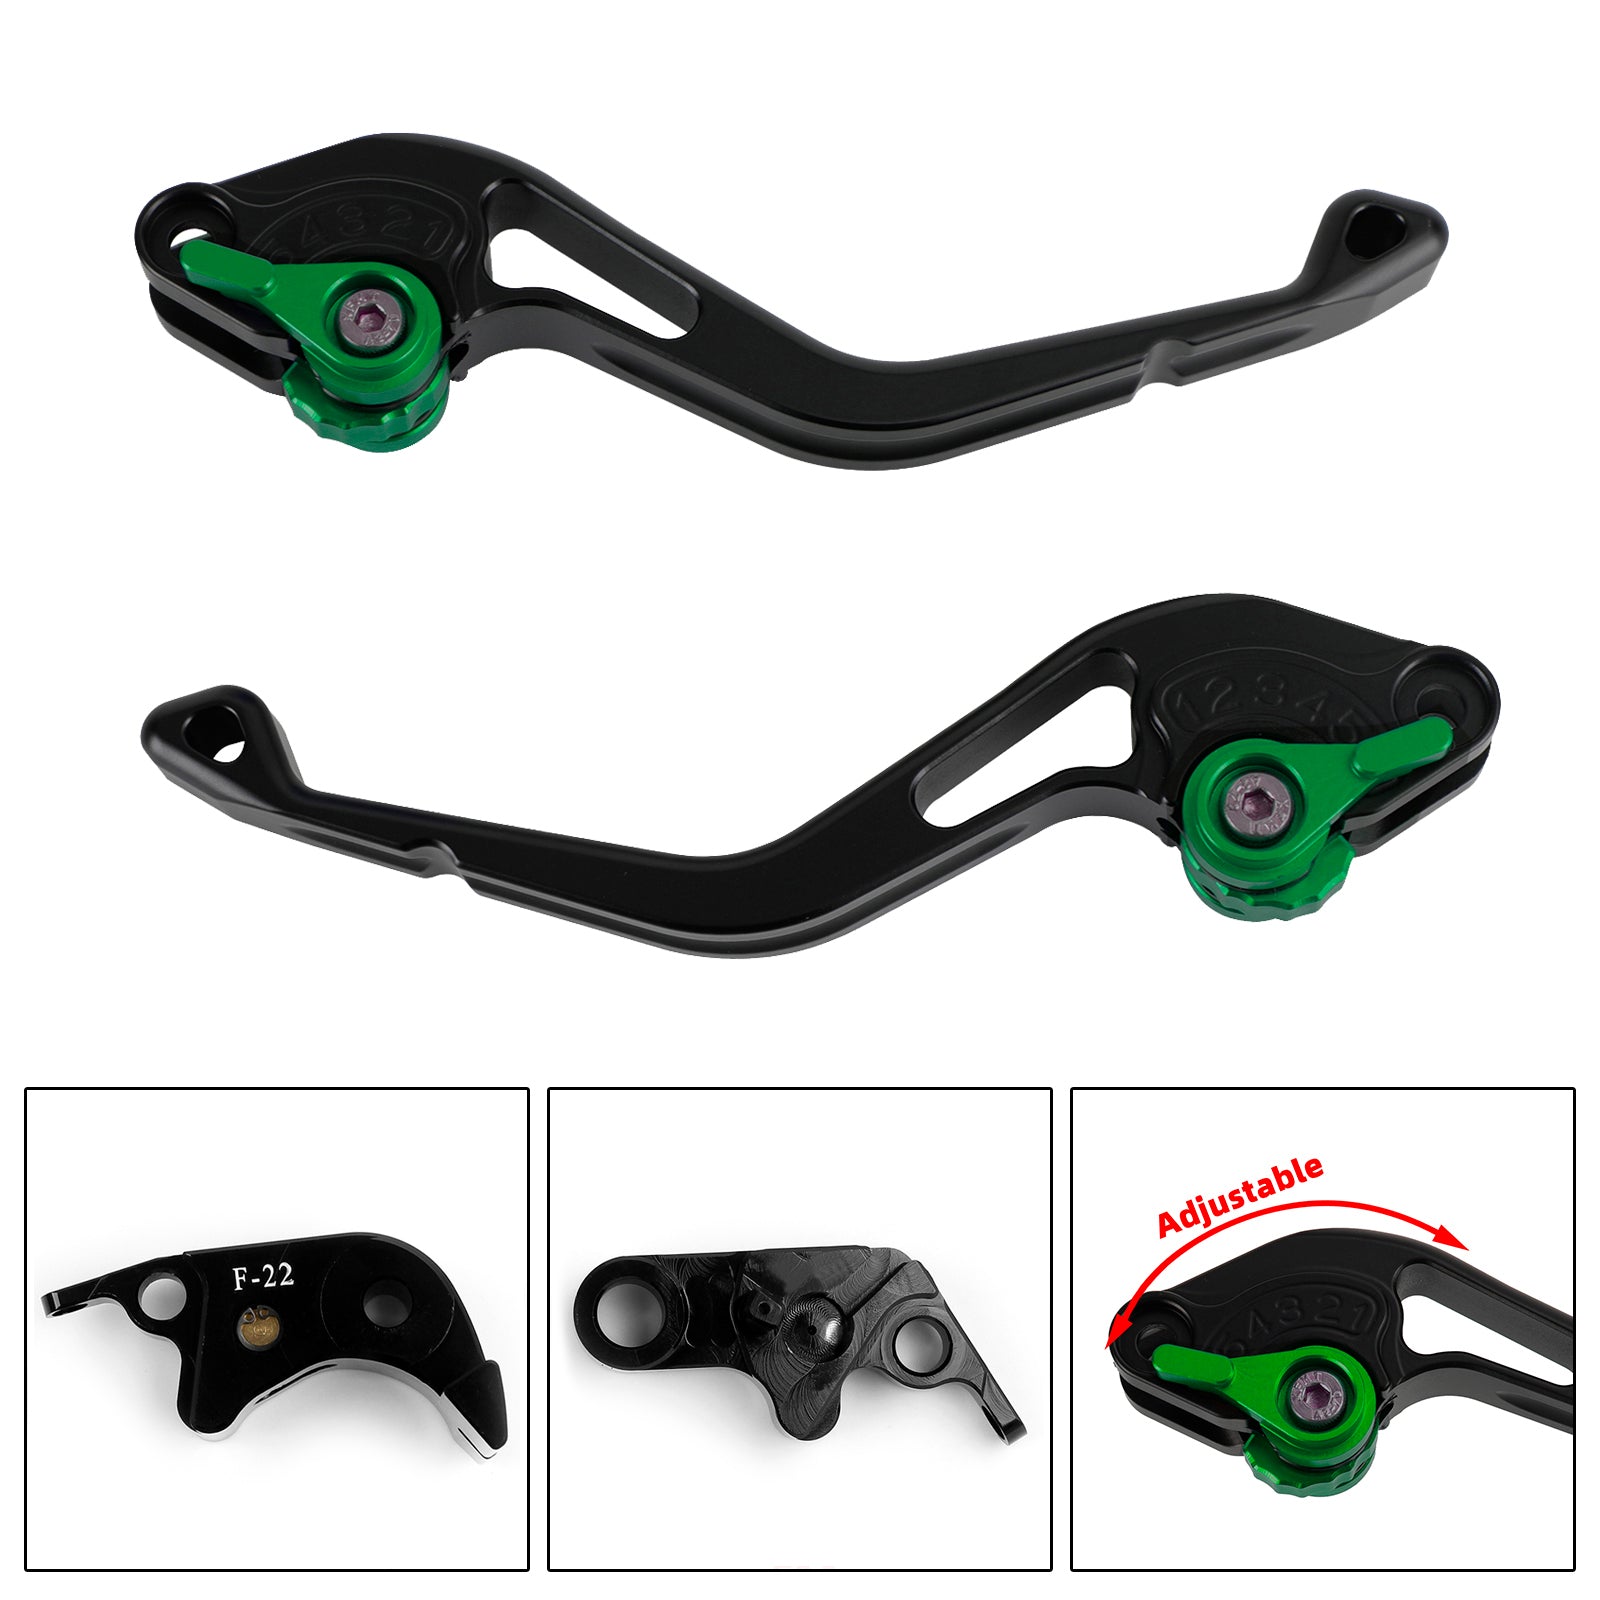 NEW Short Clutch Brake Lever fit for BMW S1000R 2014 S1000RR 2010-2014